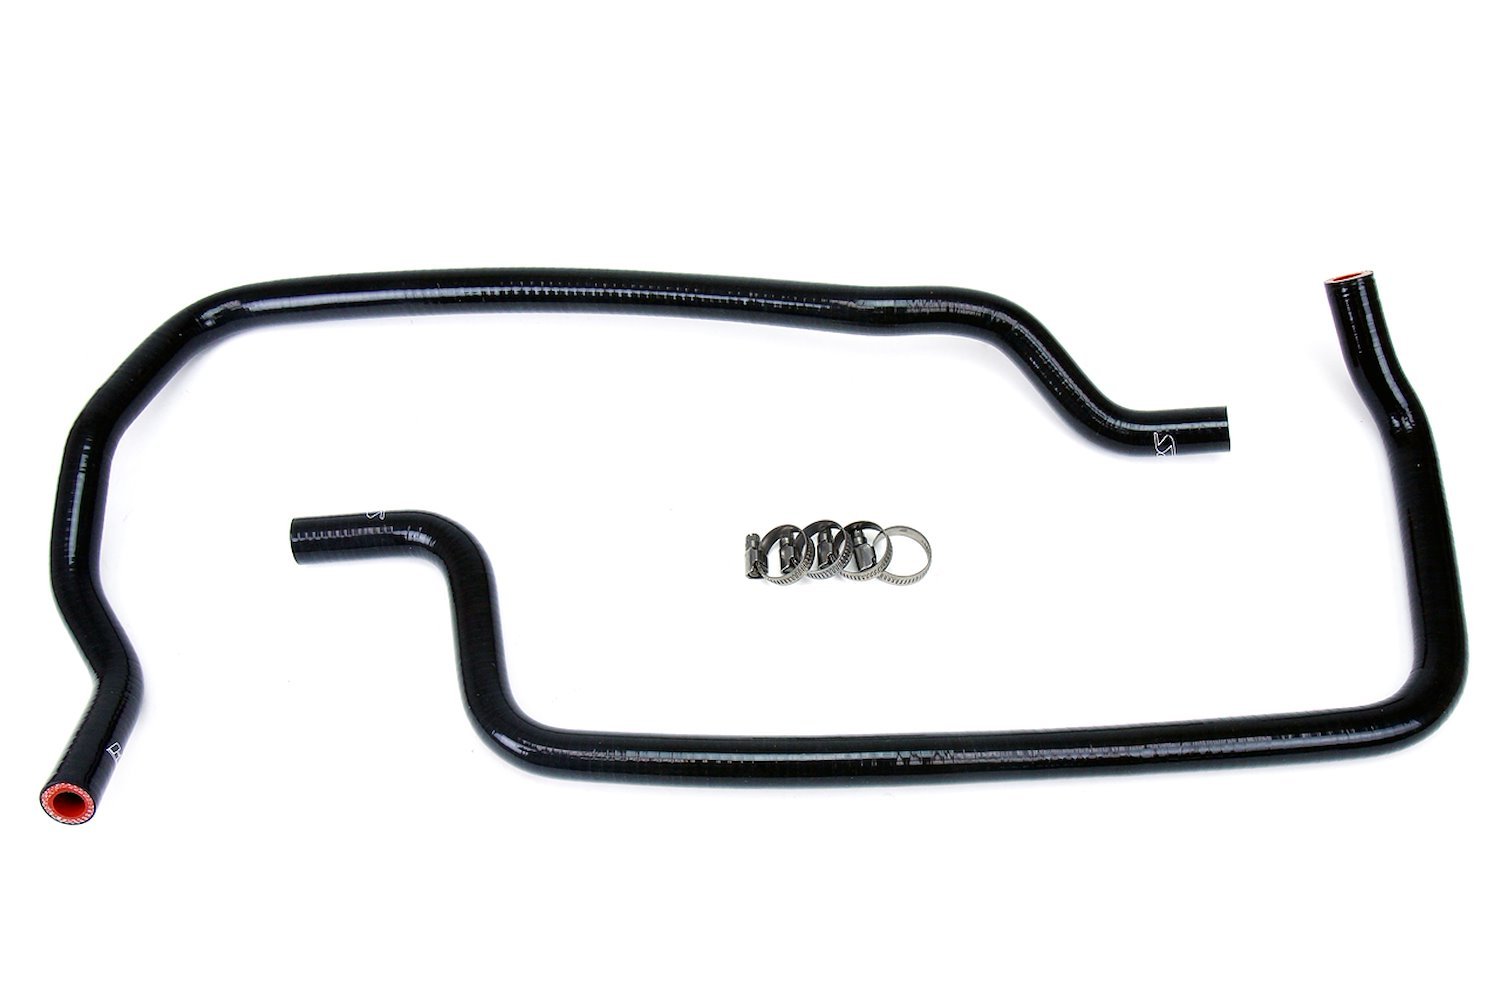 57-1449H-BLK Heater Hose Kit, High-Temp 3-Ply Reinforced Silicone, Replace OEM Rubber Heater Coolant Hoses